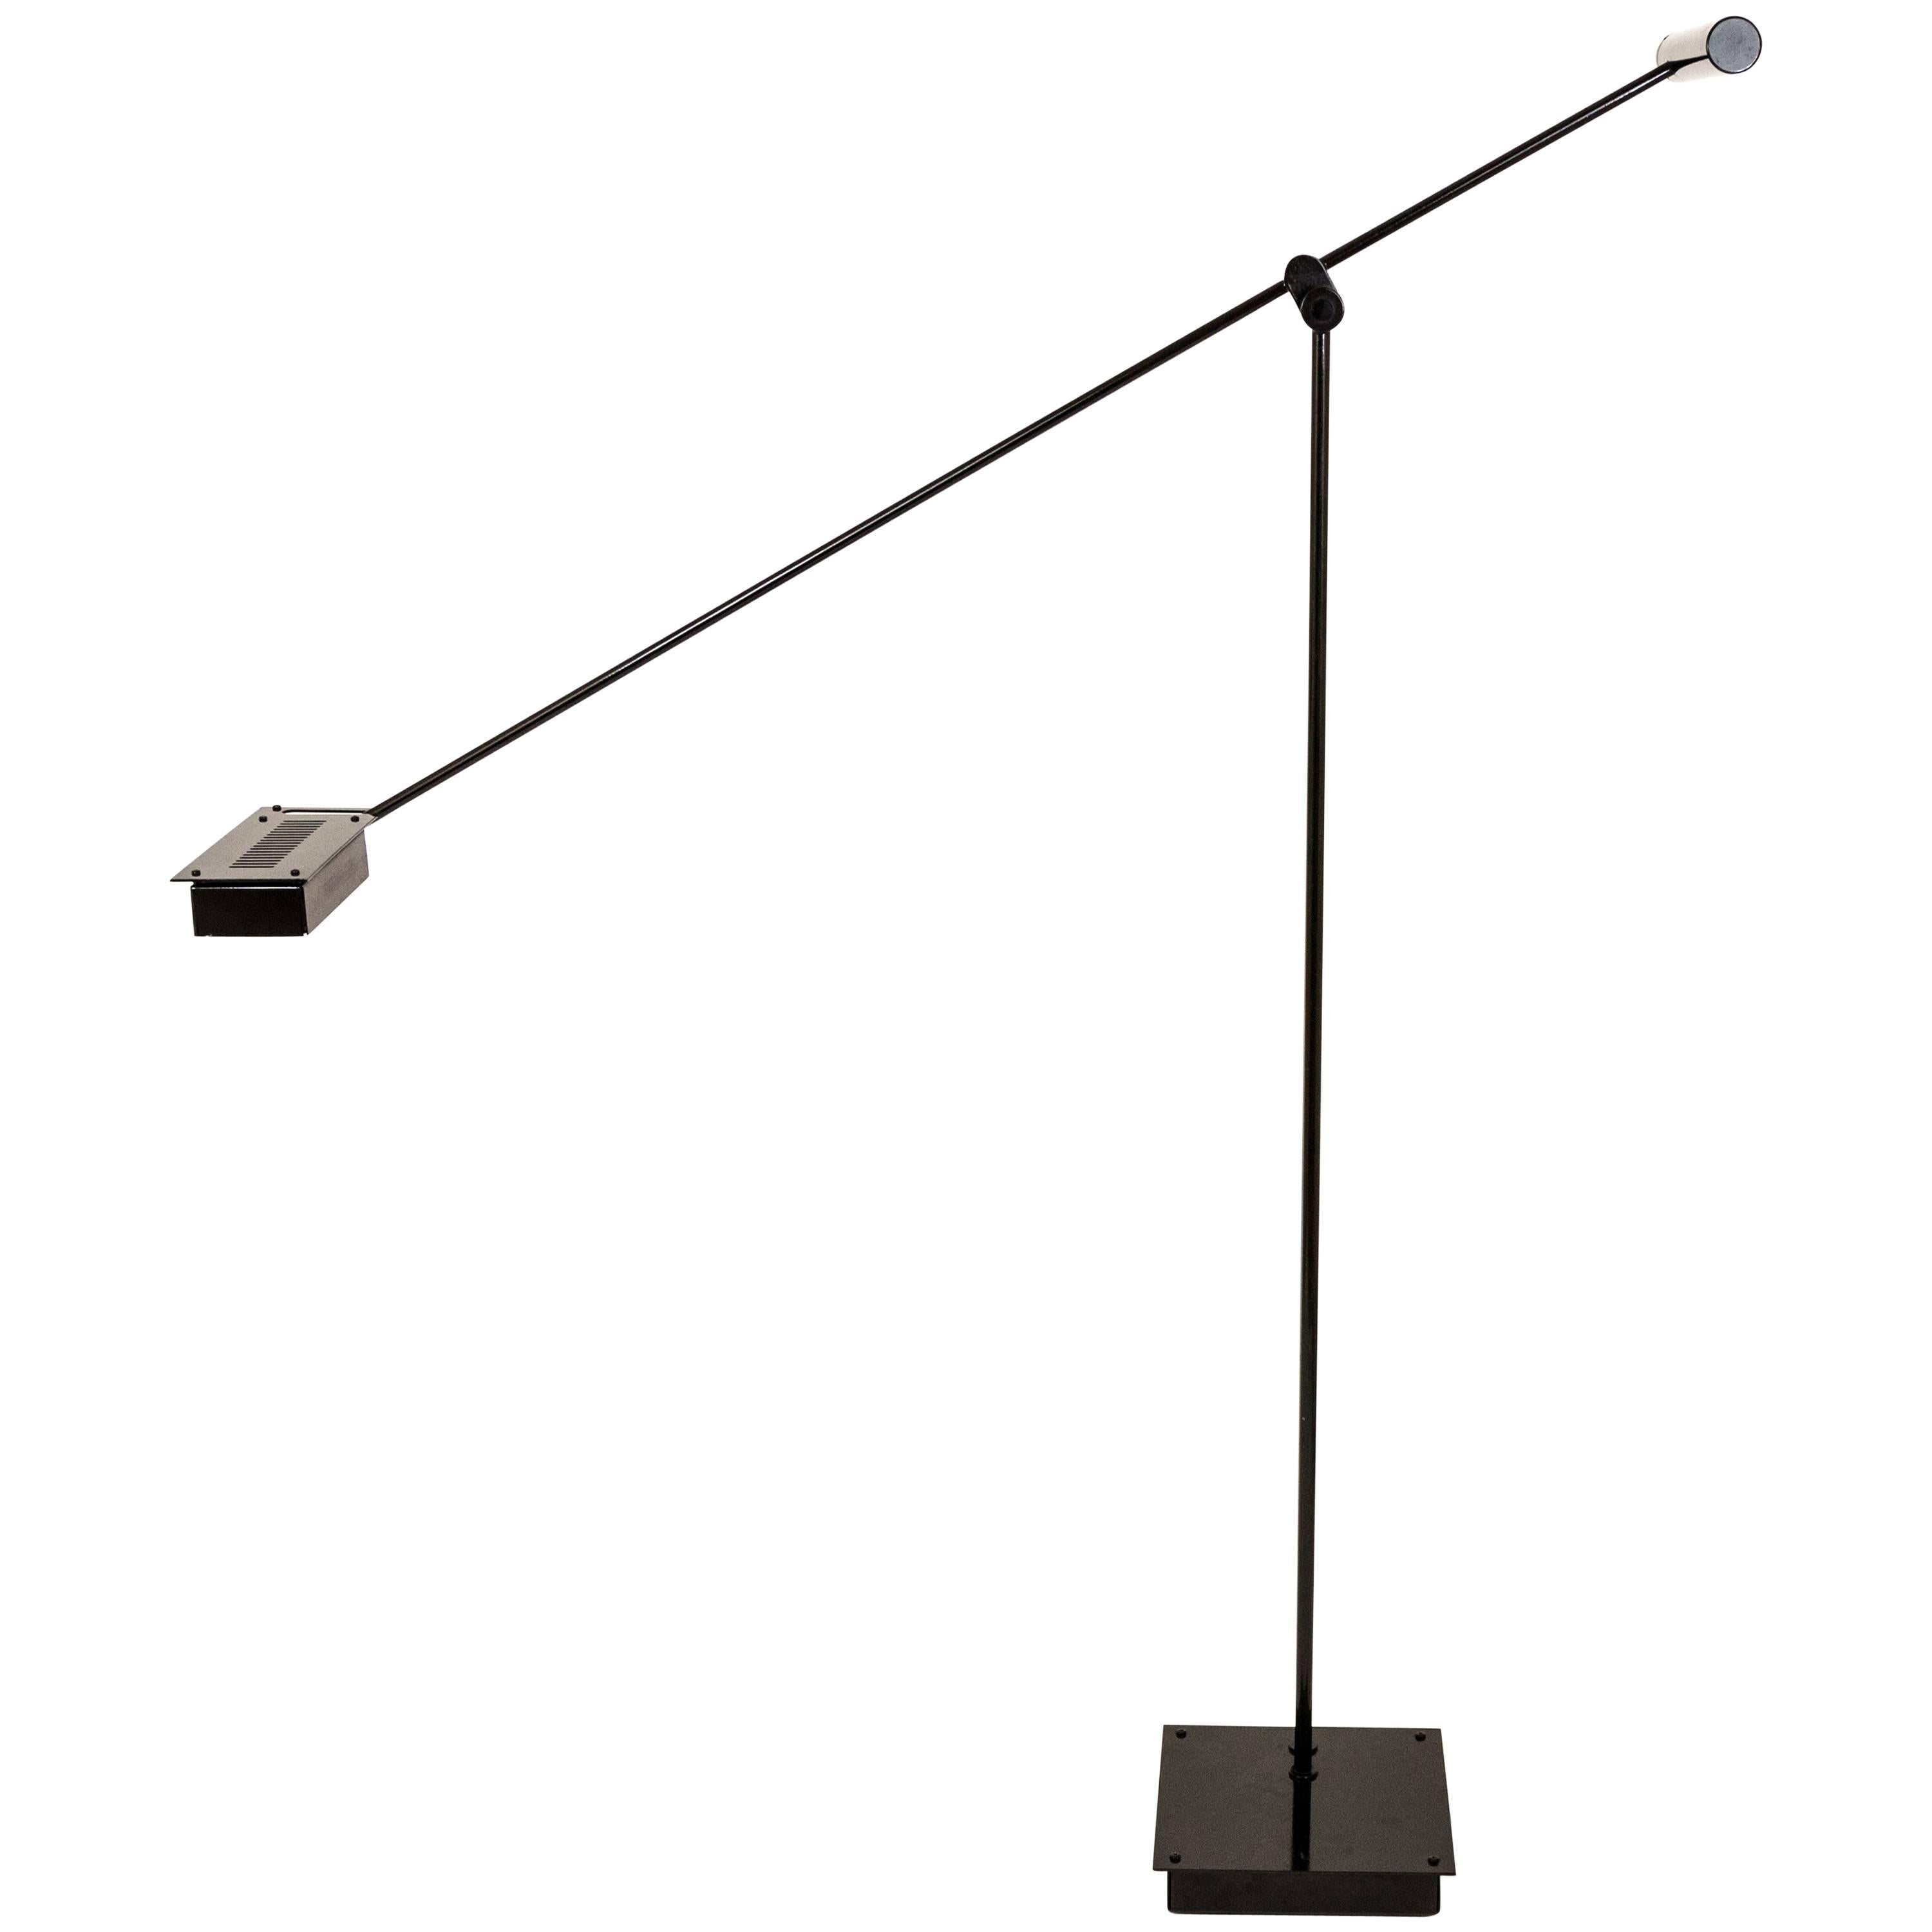 'Samurai' is an impressive floor lamp by Japanese designer Shigeaki Asahara for Italian lighting manufacturer Stilnovo, designed in the 1970s. 

The height of this halogen floor lamp is adjustable with a maximum height of 2 meters. The dimmer is